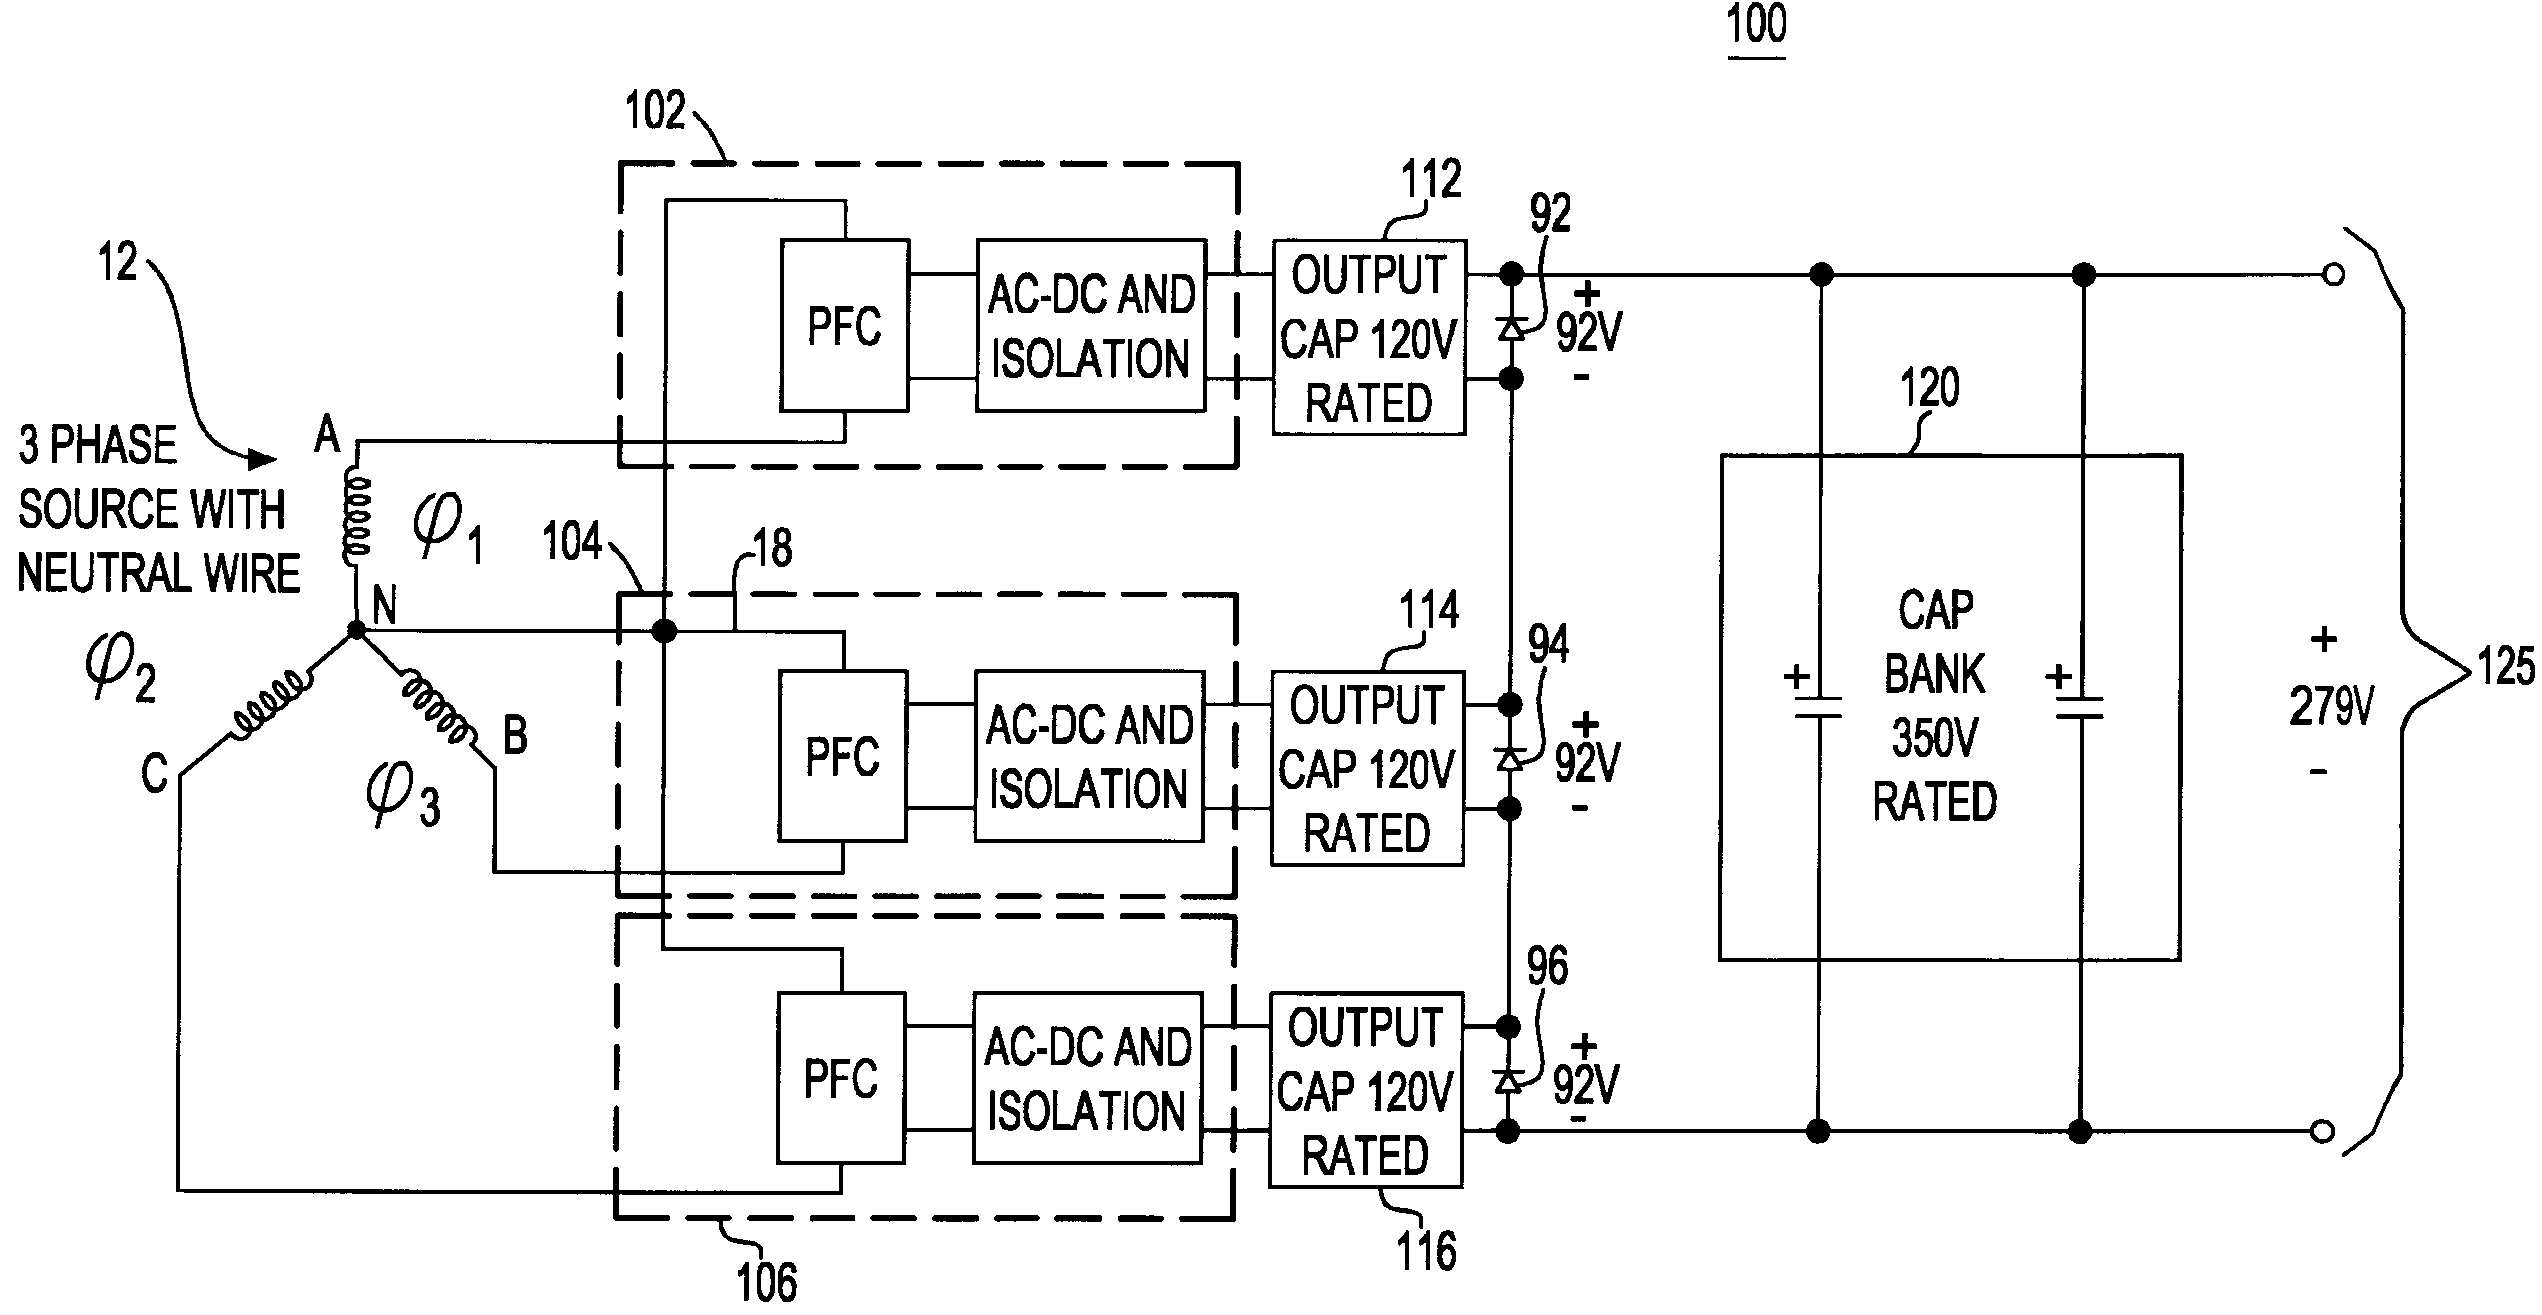 AC to DC power supply having zero frequency harmonic contents in 3-phase power-factor-corrected output ripple